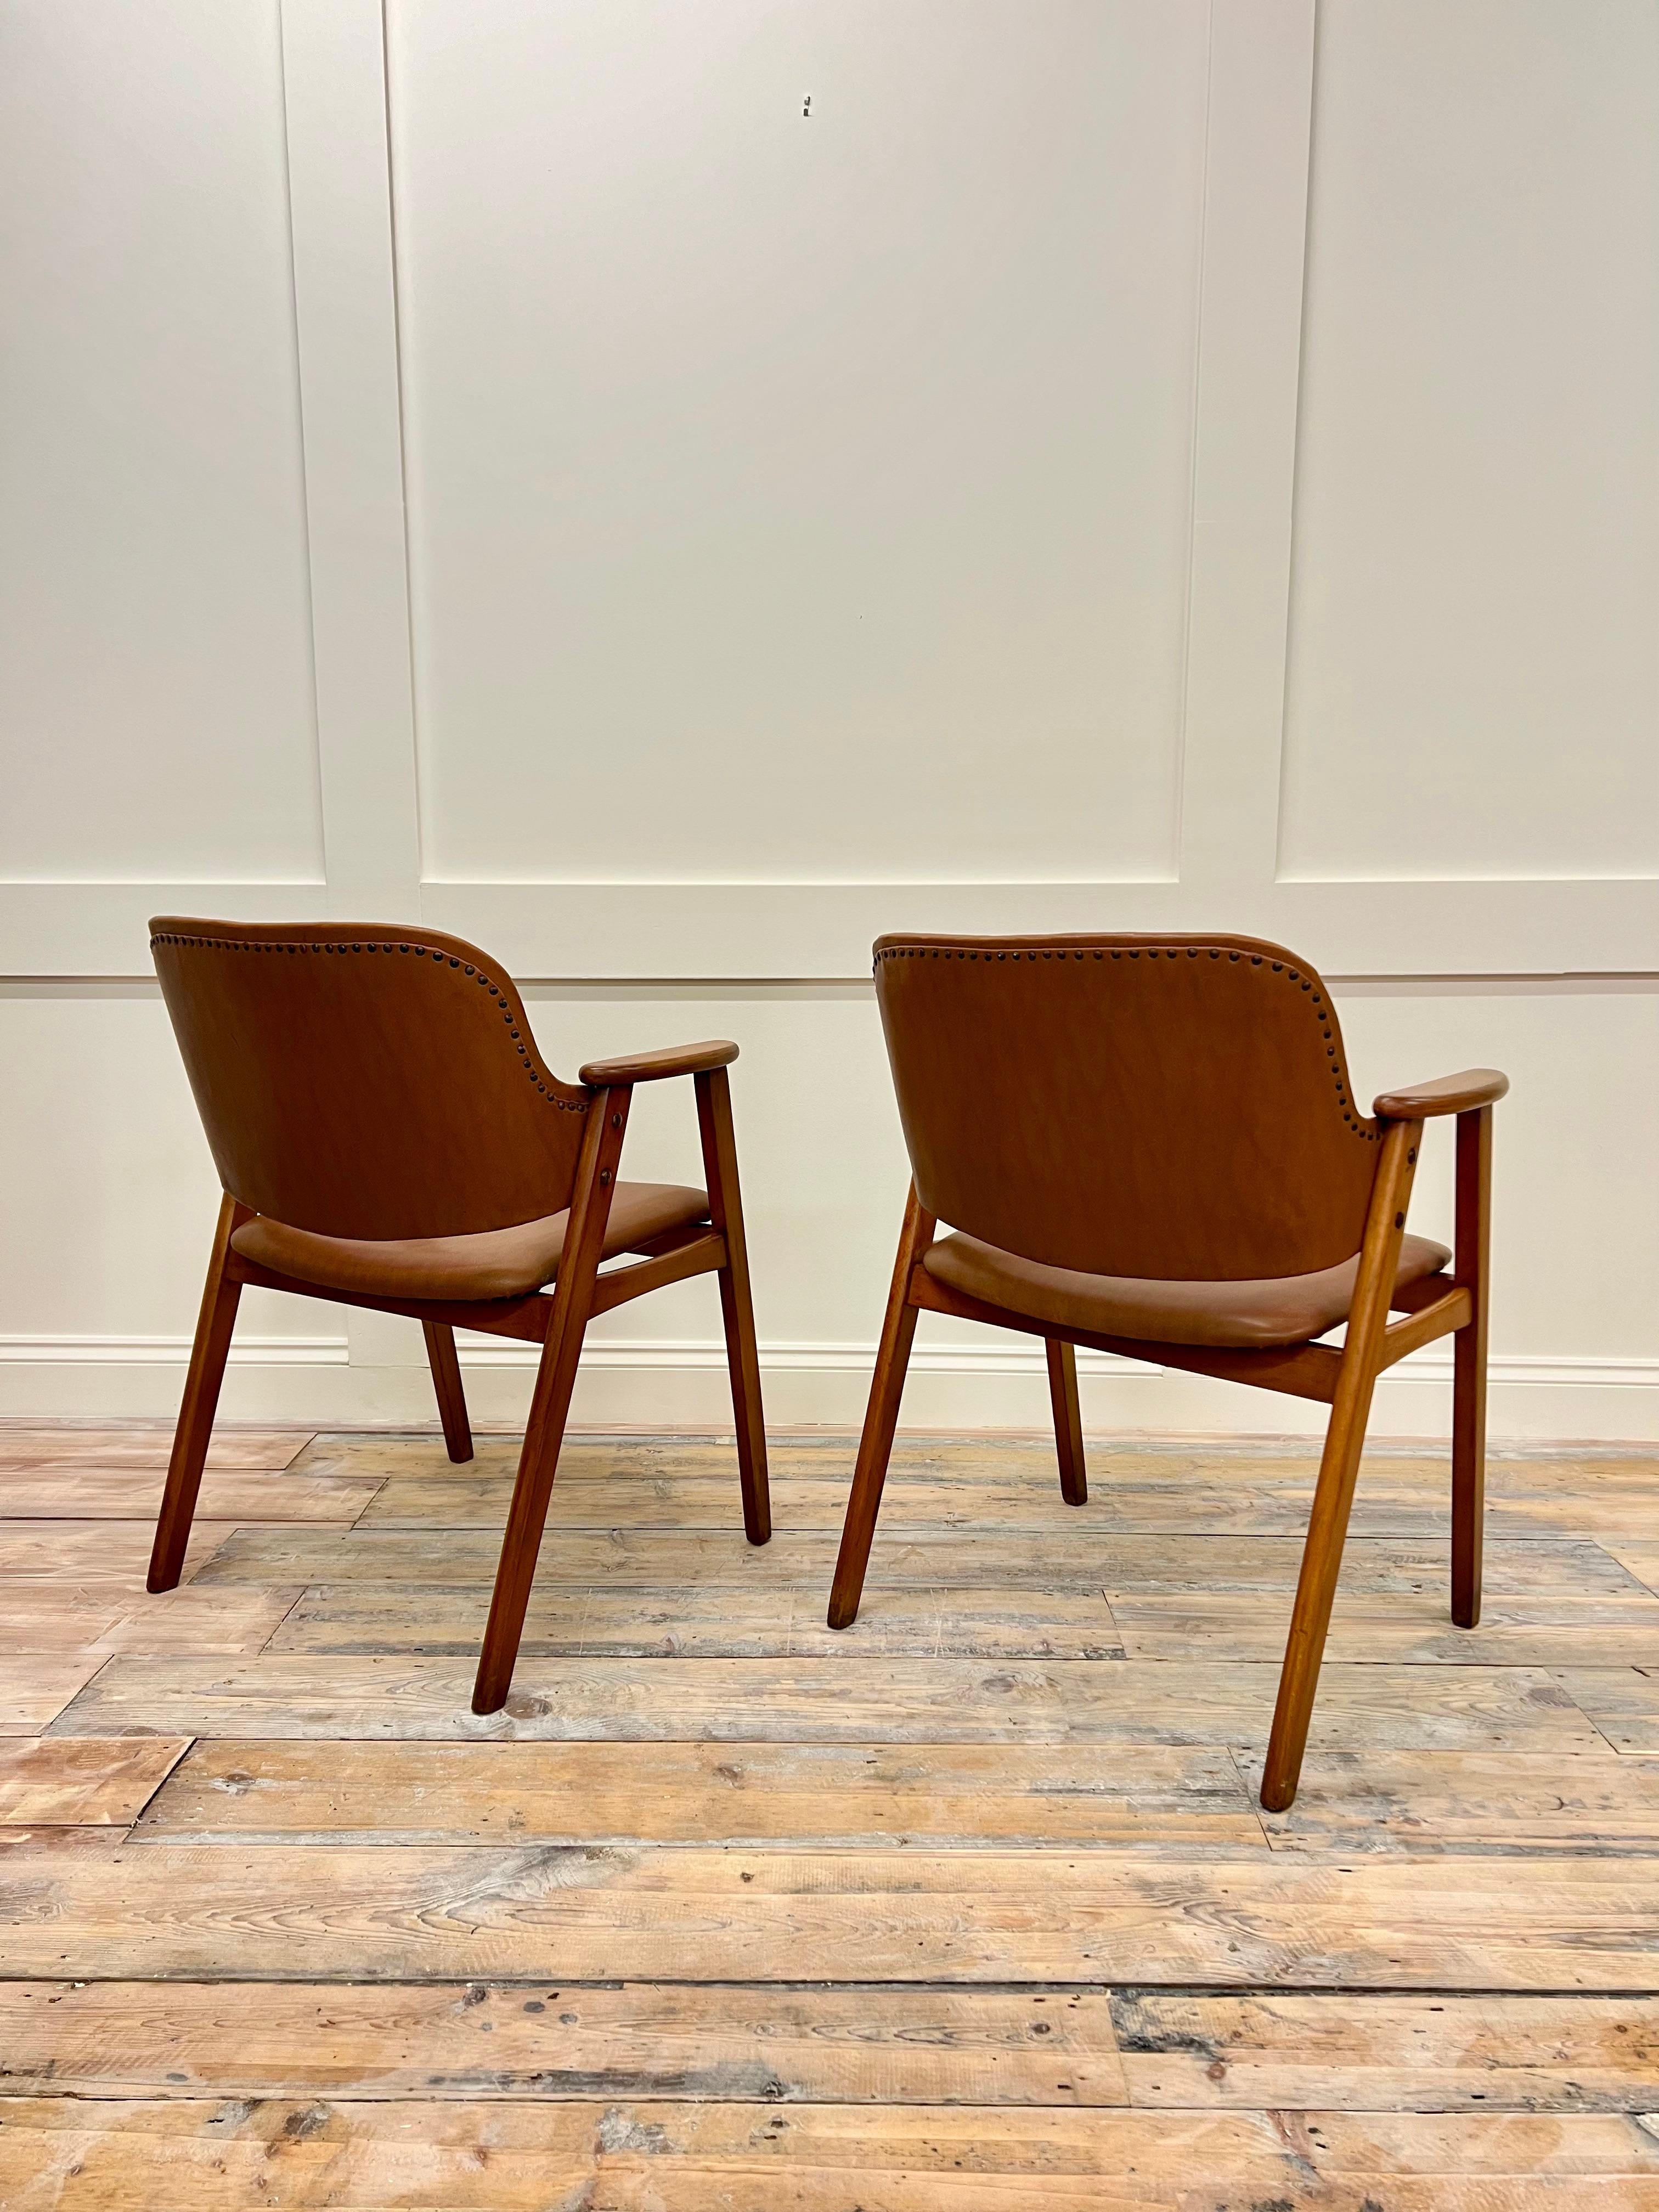 Set of 2 Midcentury Modern Dining Chairs by Cees Braakman for Pastoe, c.1950s 1